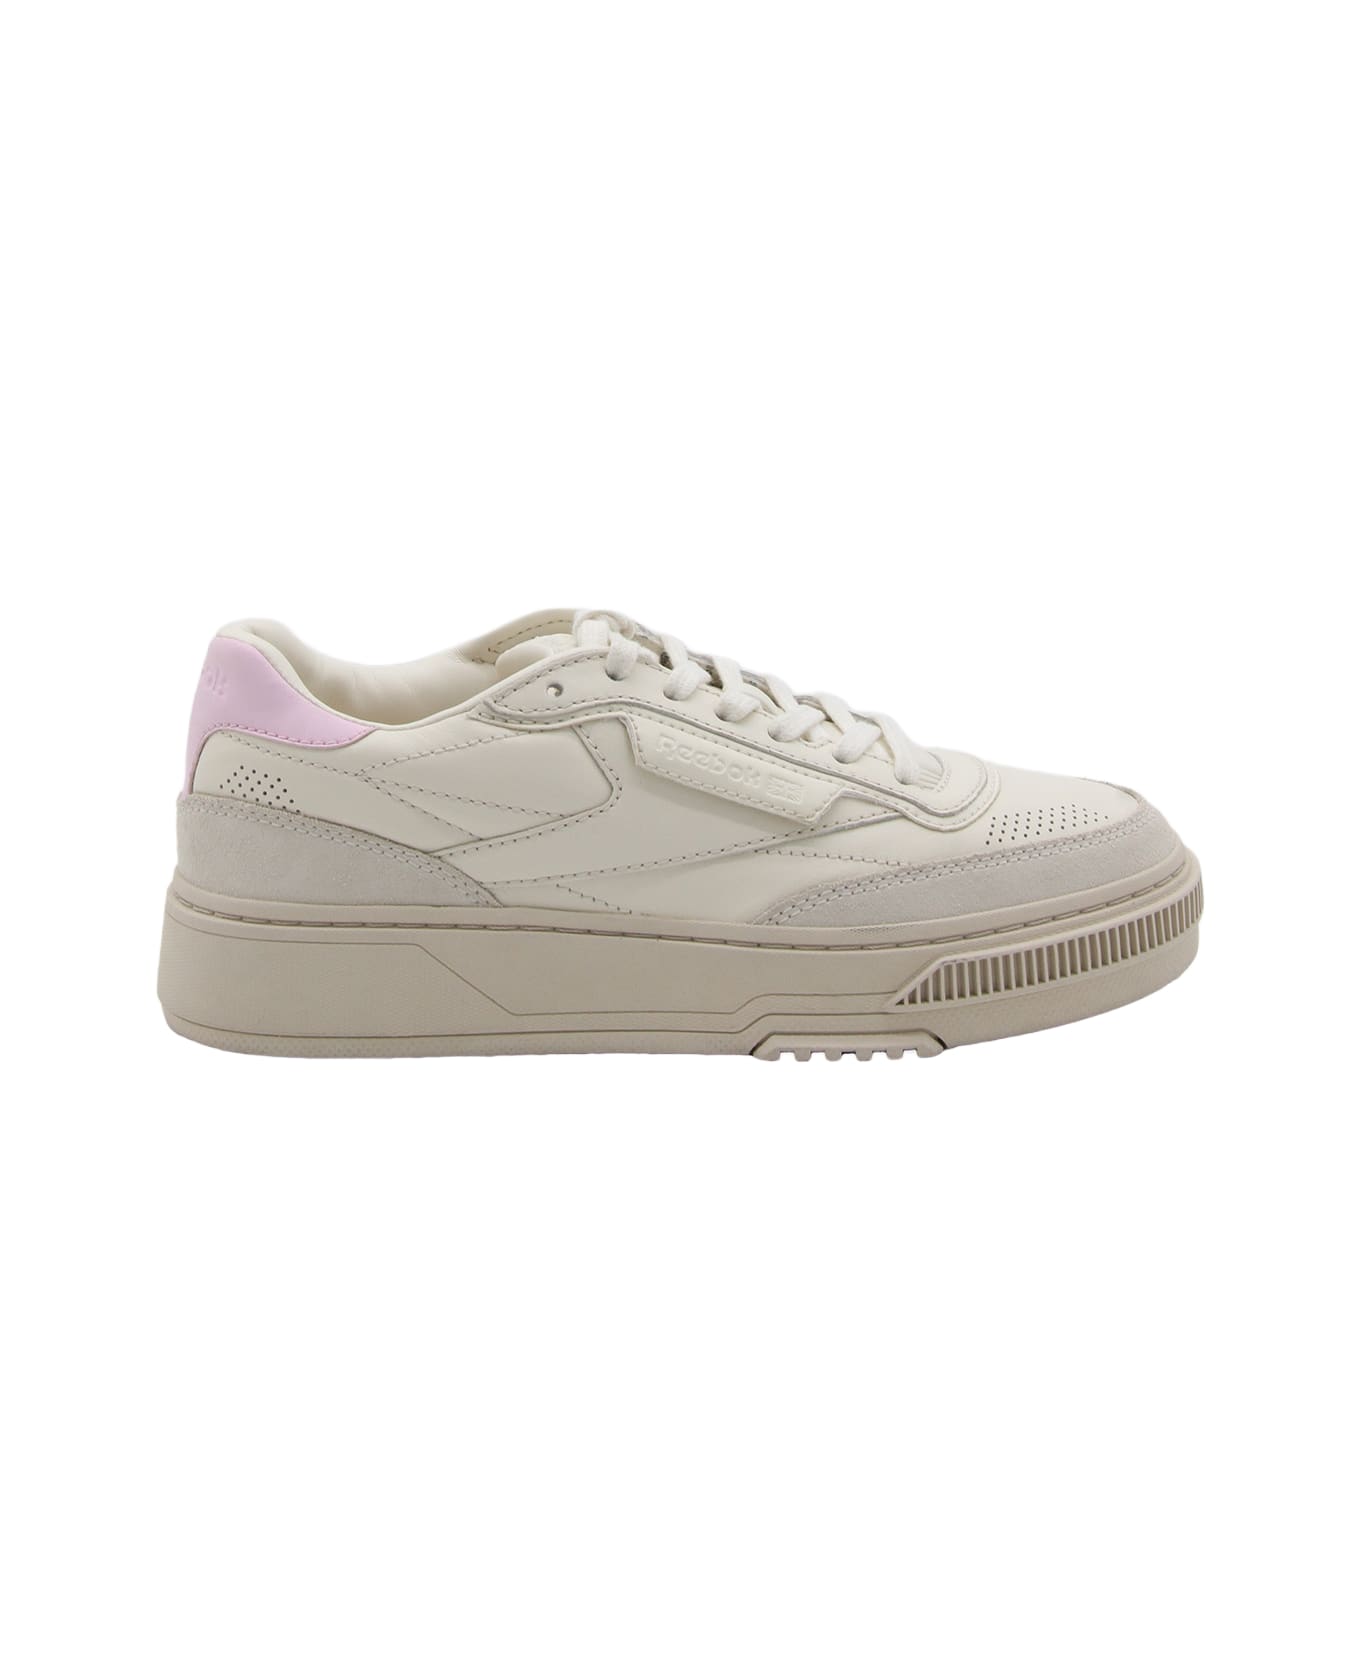 Reebok White And Pink Leather C Ltd Sneakers - WHITE/PINK